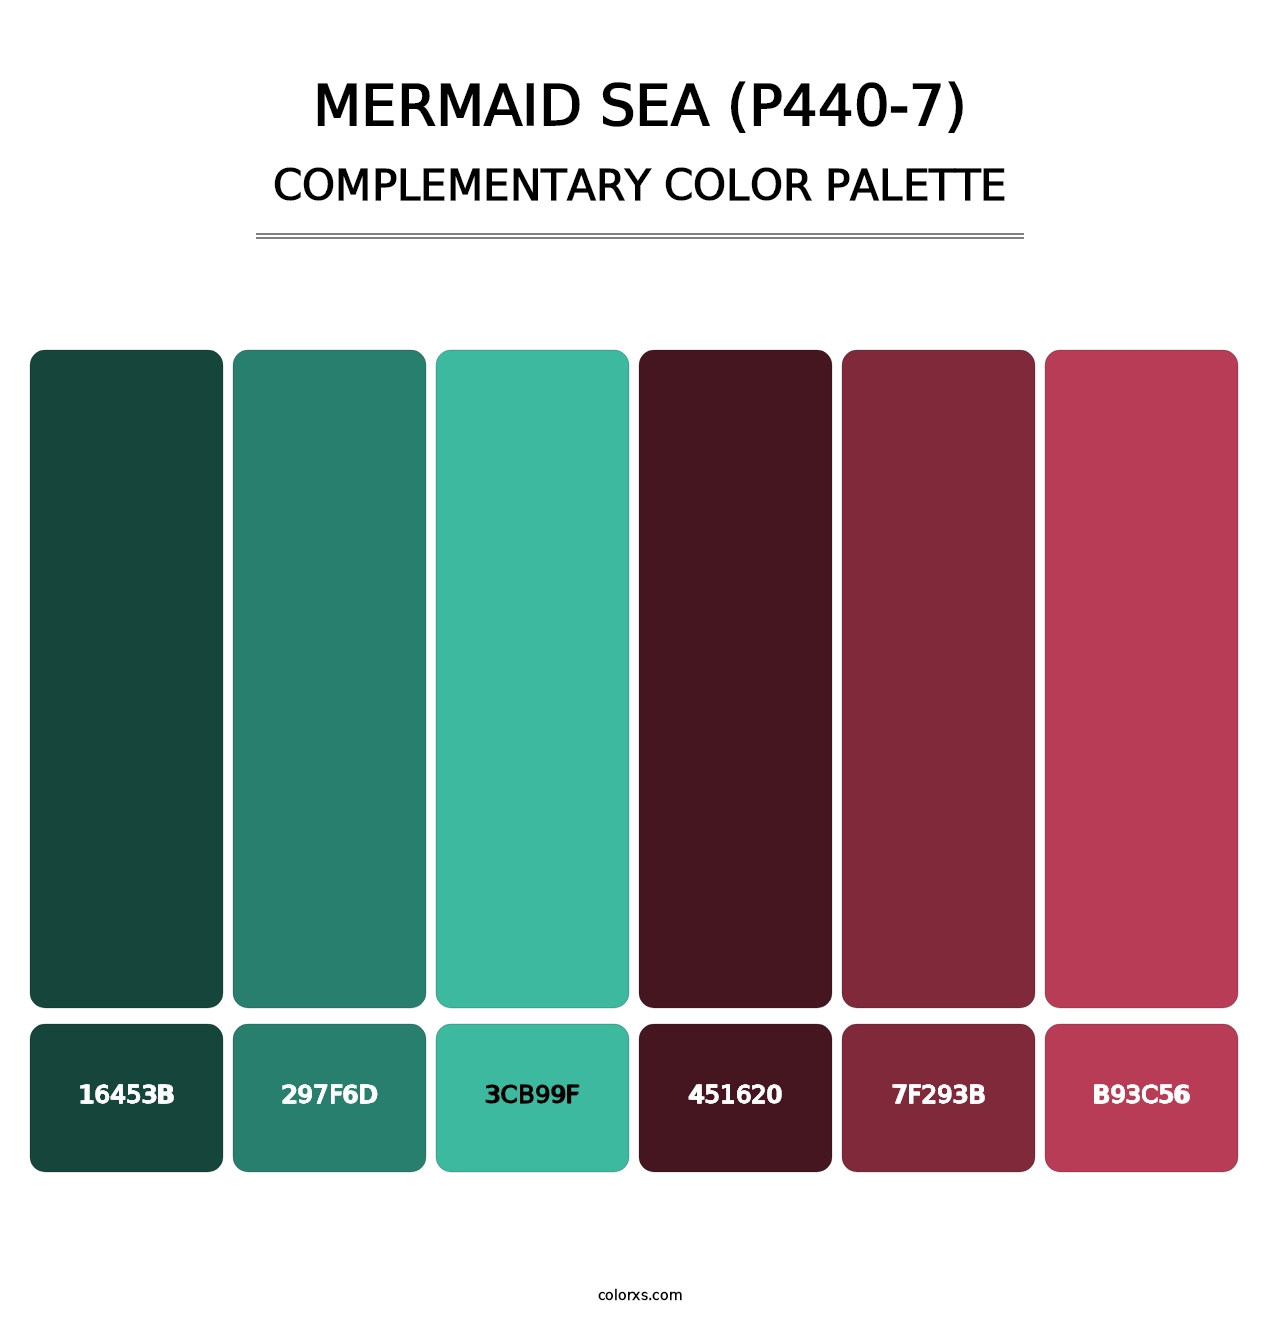 Mermaid Sea (P440-7) - Complementary Color Palette